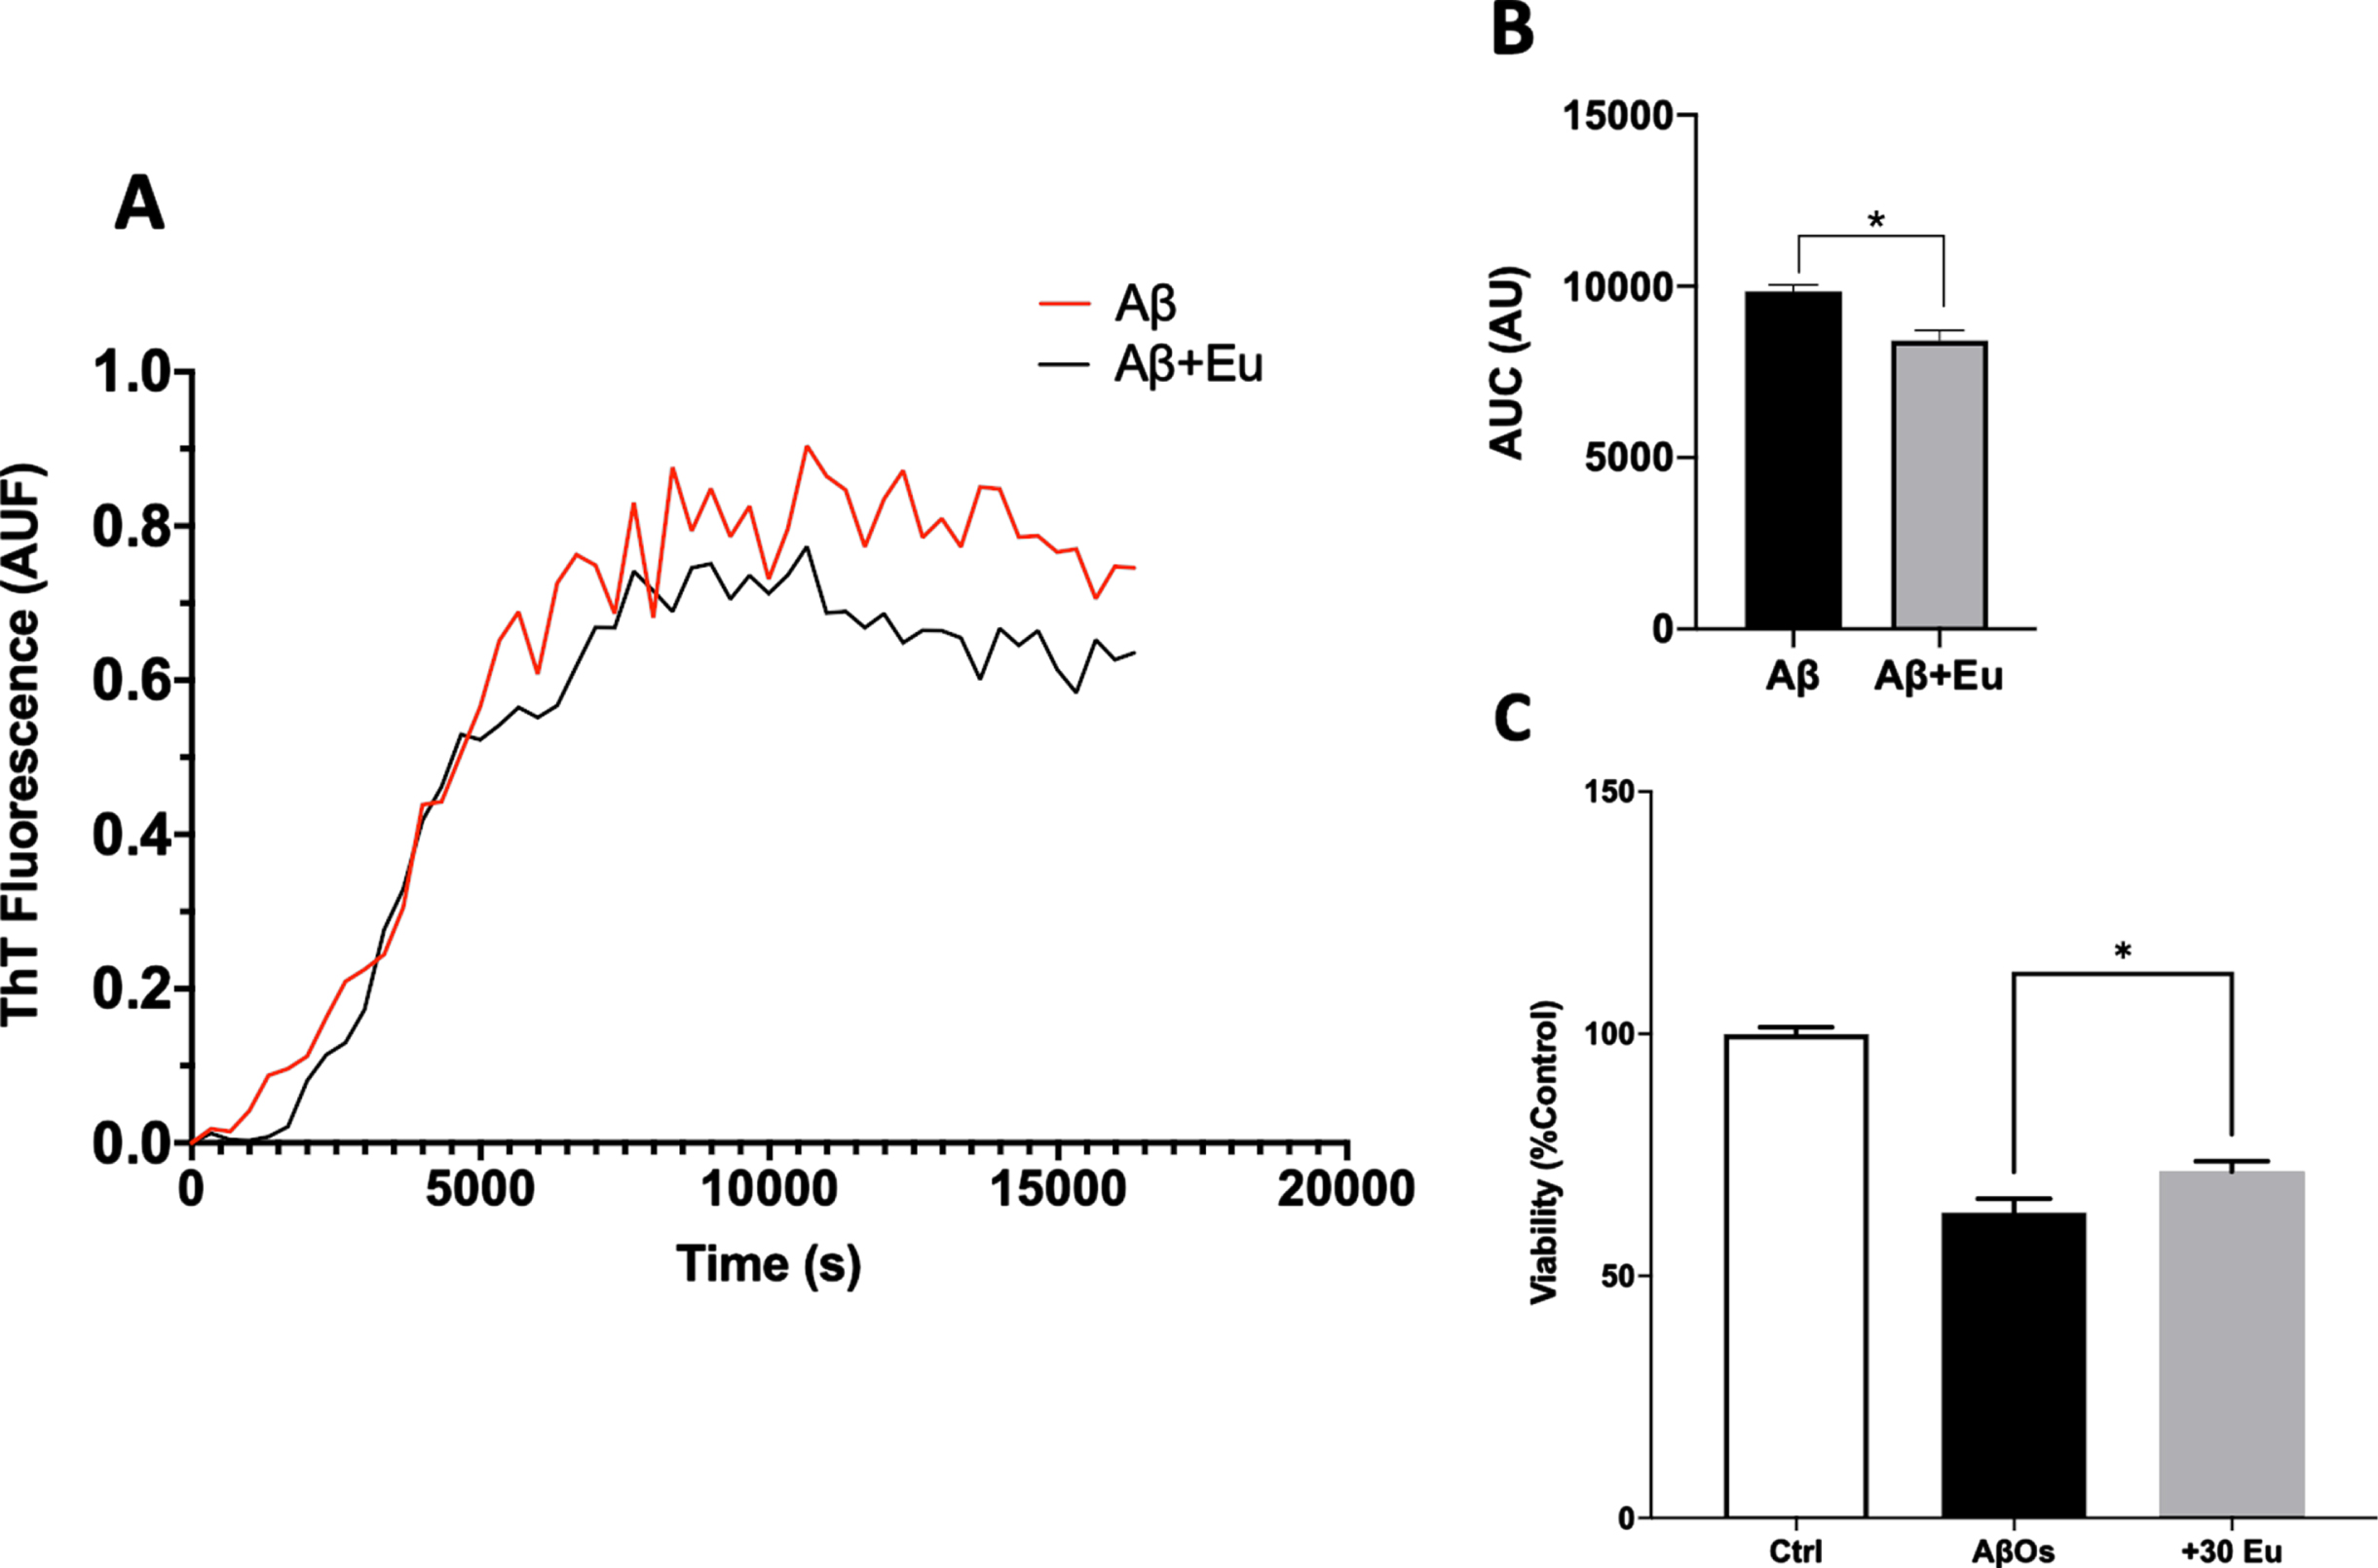 Eudesmin effects on Aβ aggregation. Aβ1-40 (80μM) aggregation was measured using Thioflavin T (ThT 20μM) evaluating fluorescence every 3 min for 350 min at 37°C, in absence of Eudesmin 30 nM (red) or its presence (black) (A). Area under curve quantification (arbitrary units) shown the effect of Eudesmin over the background fluorescence of ThT (B). Viability quantification evaluated on PC12 cells using MTT to compare response against AβOs or AβOs+Eu (30 nM) (C). Values are mean±SEM, n = 3 using one-way ANOVA and Tukey or Welch’s test. *p < 0.05.